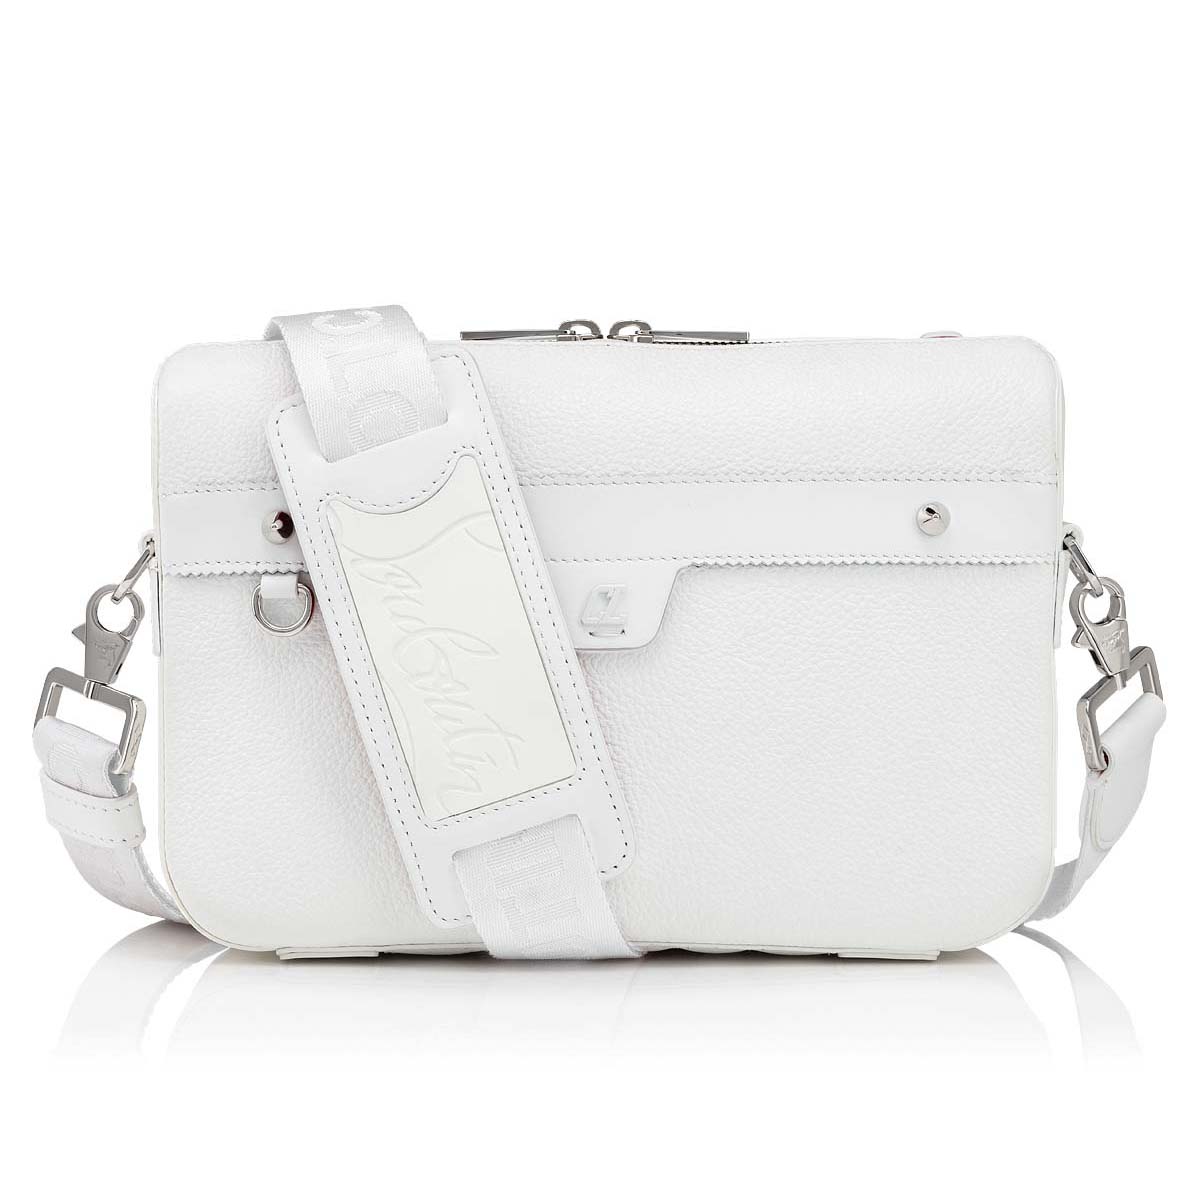 Blanche leather satchel